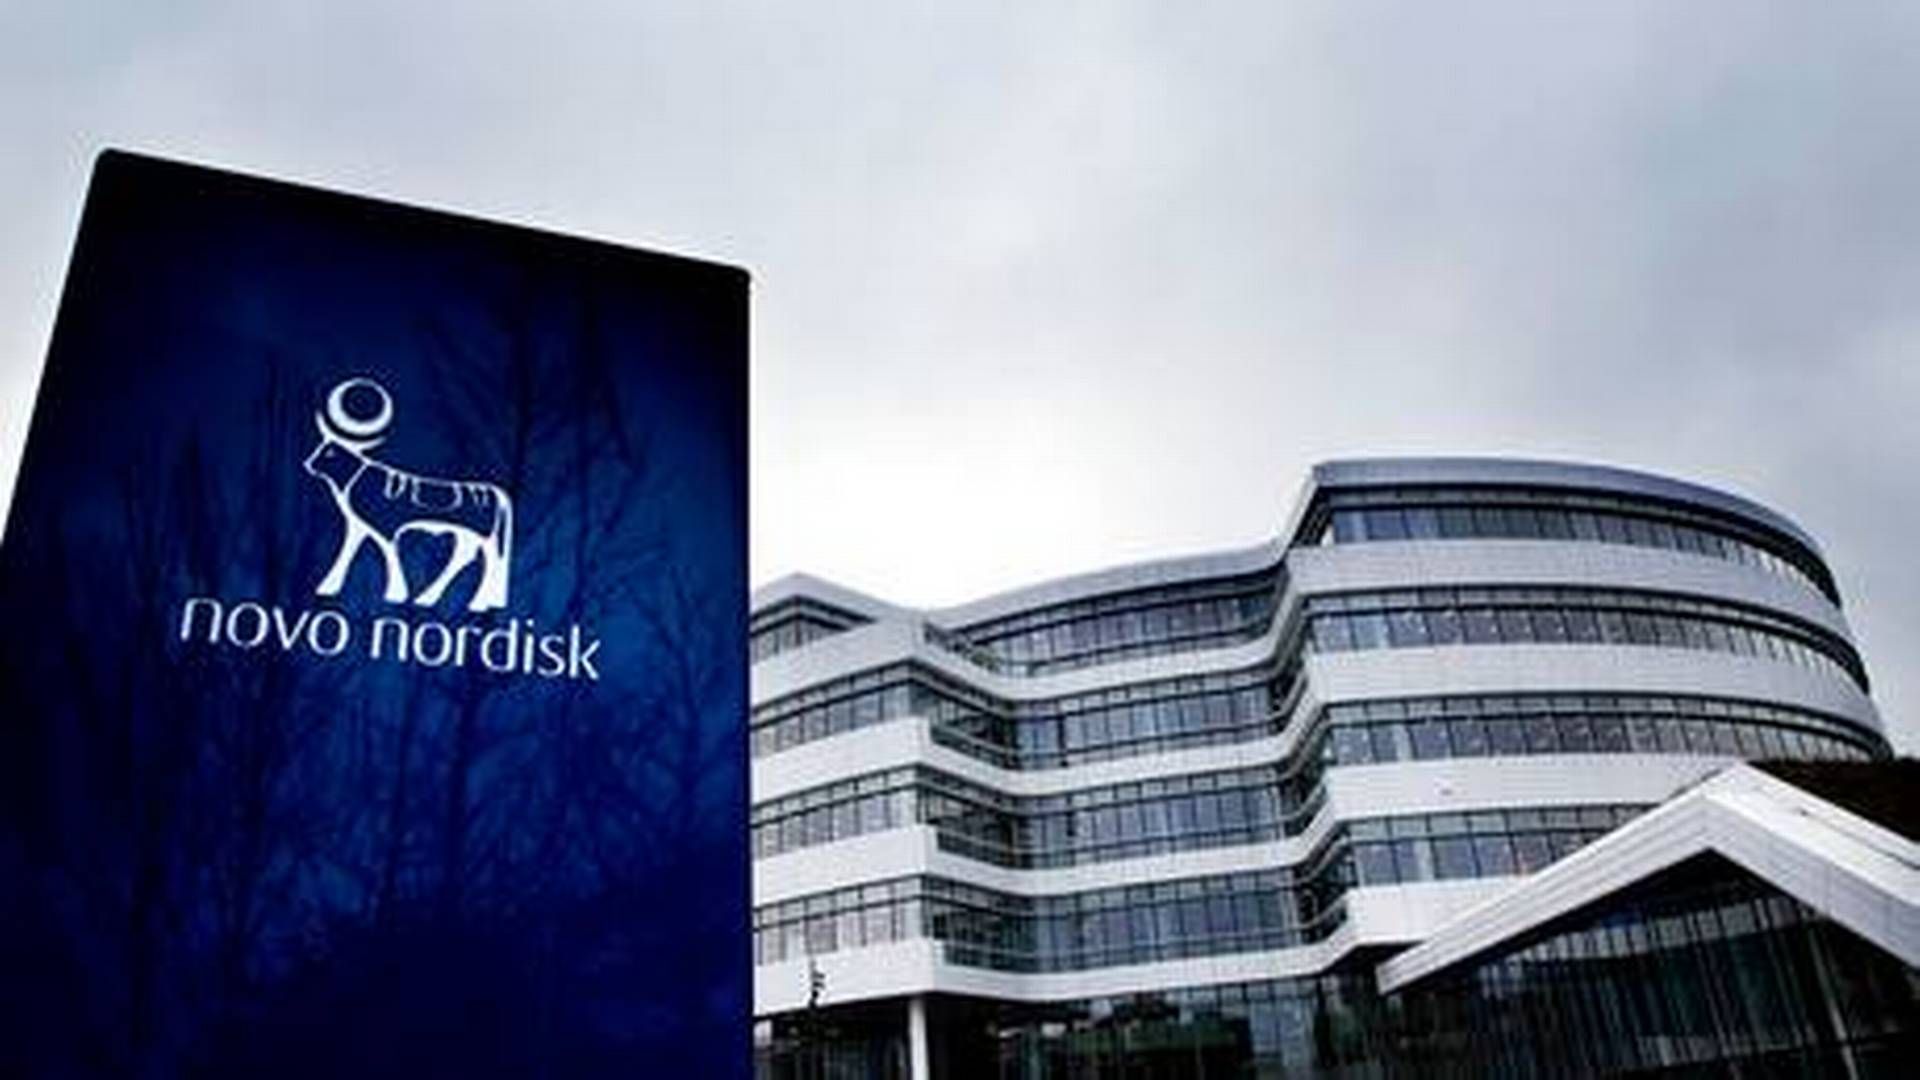 Novo Nordisk hopes for better synergy and a foundation for growth after merging research departments. | Foto: Foto: Linda Kastrup/Ritzau Scanpix